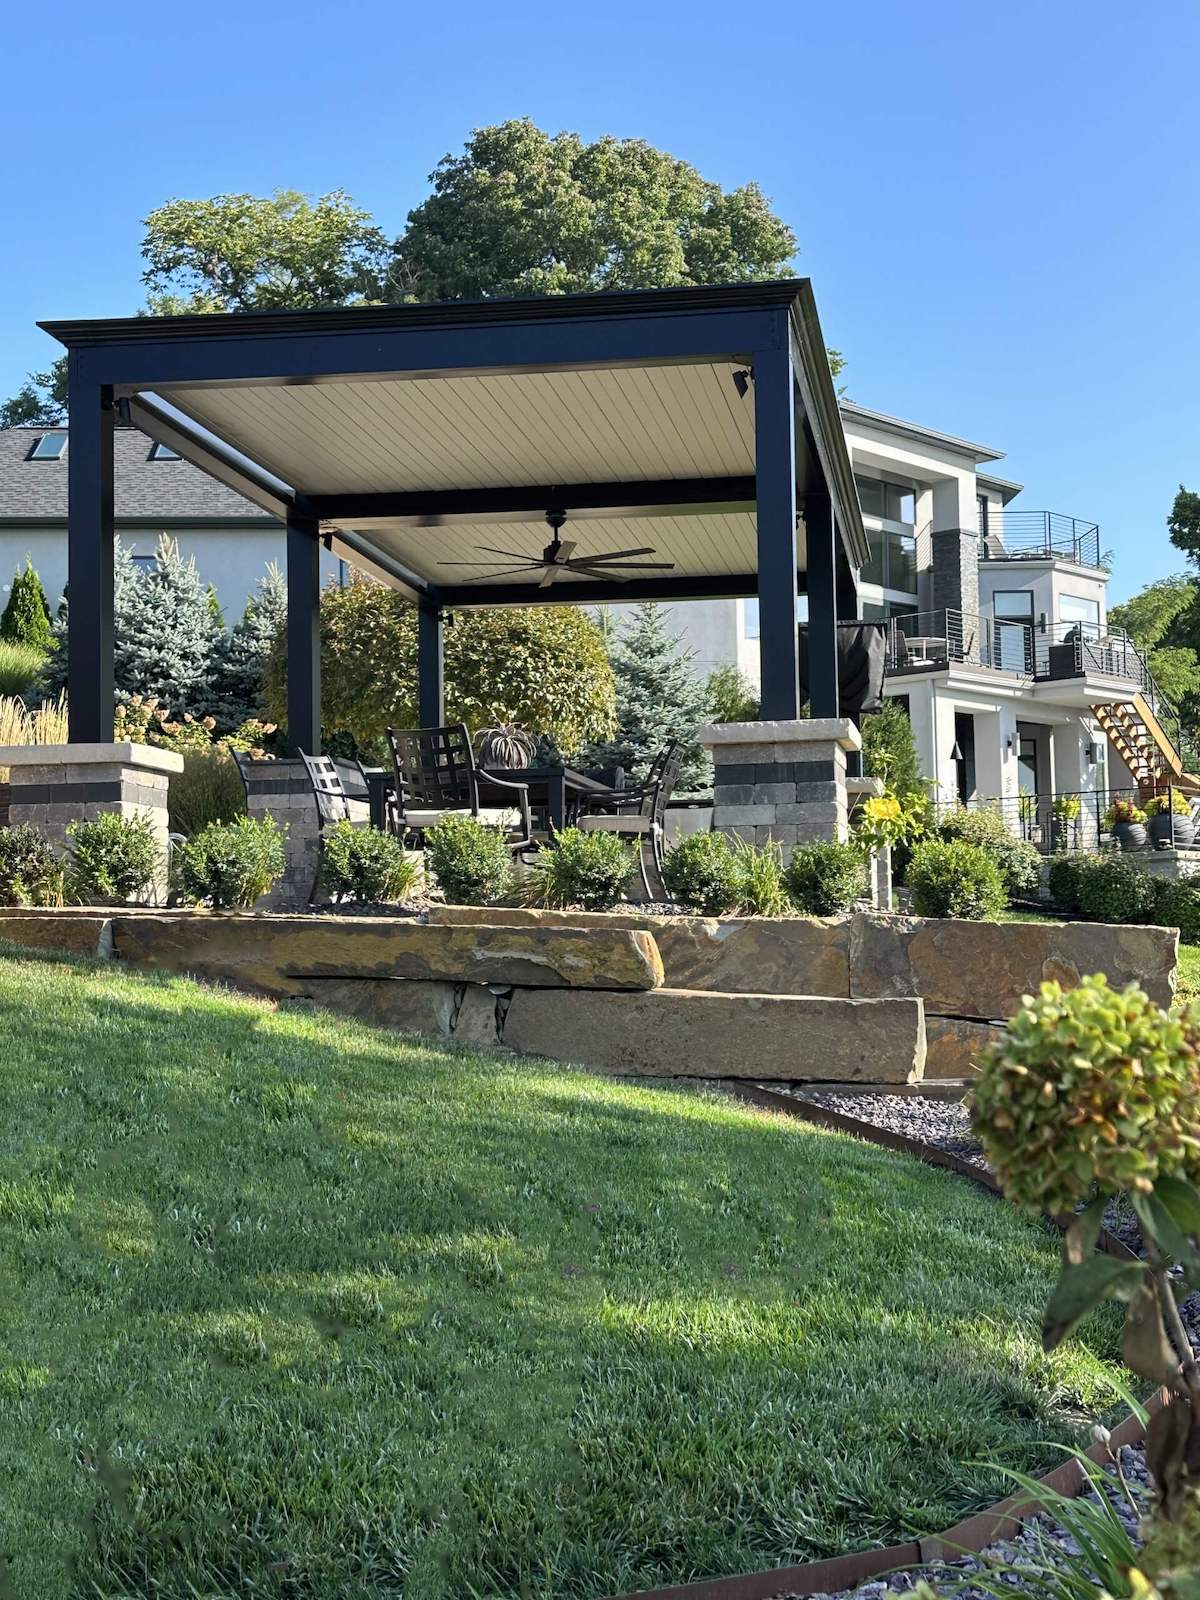 Scenic backyard featuring a gazebo and patio, ideal for enjoying the outdoors.